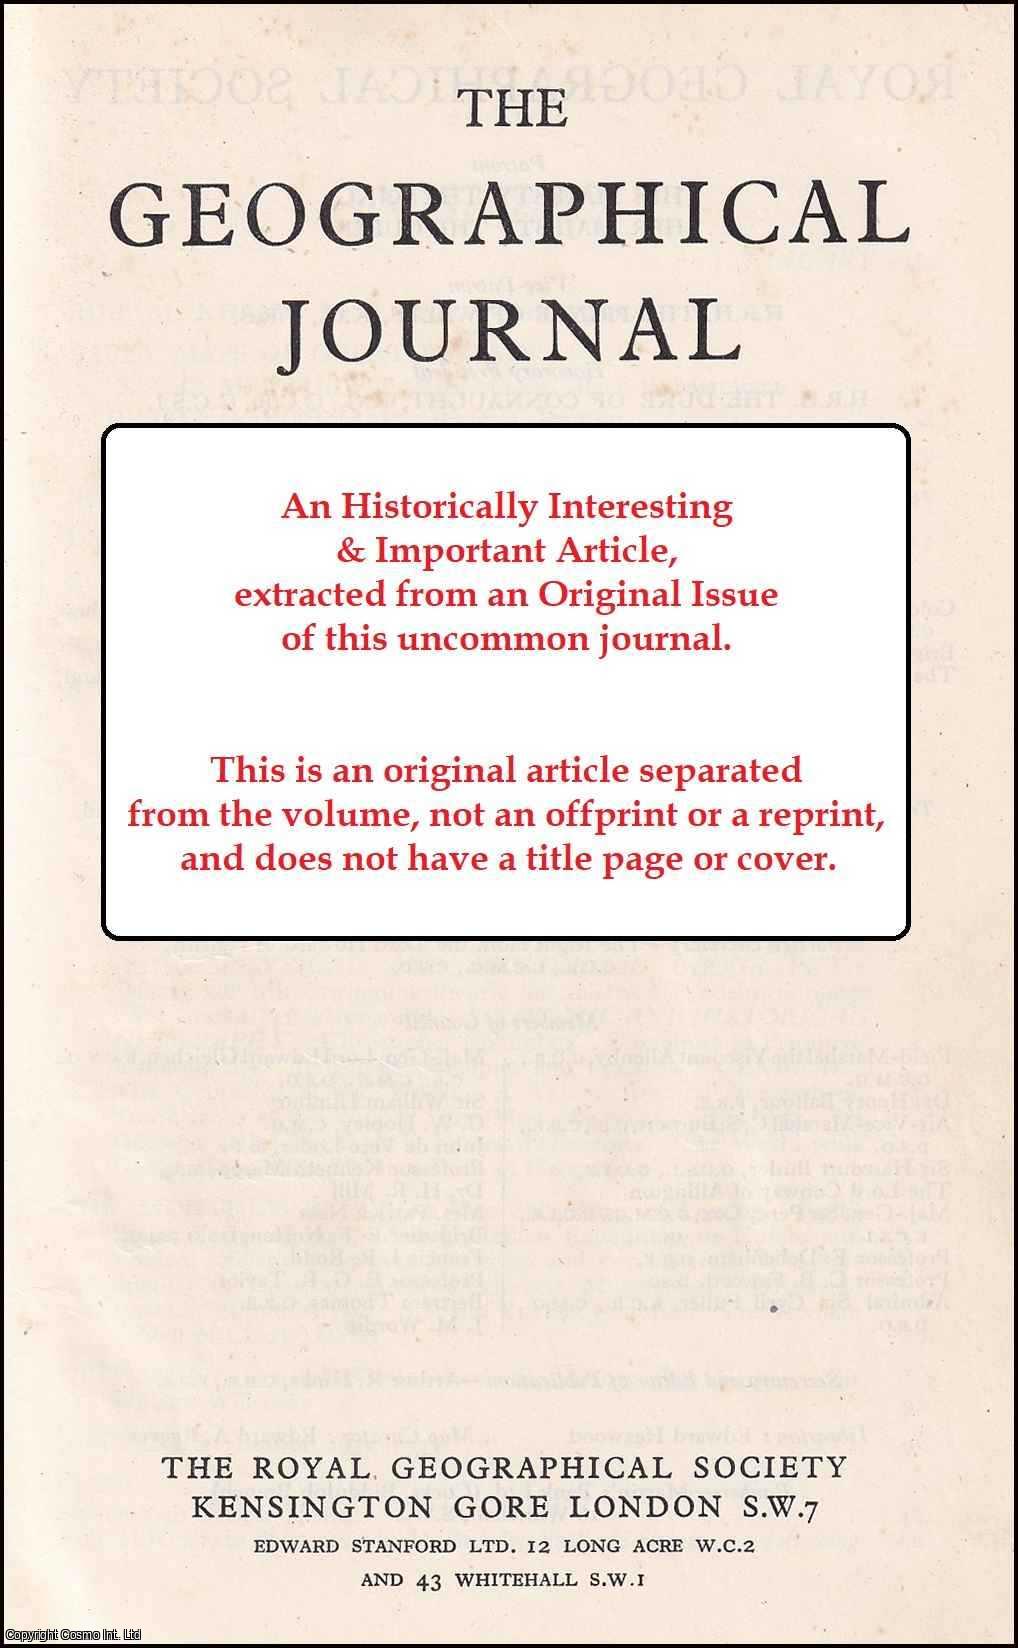 D. Brunt - Climatic Cycles. An original article from the Geographical Journal, 1937.